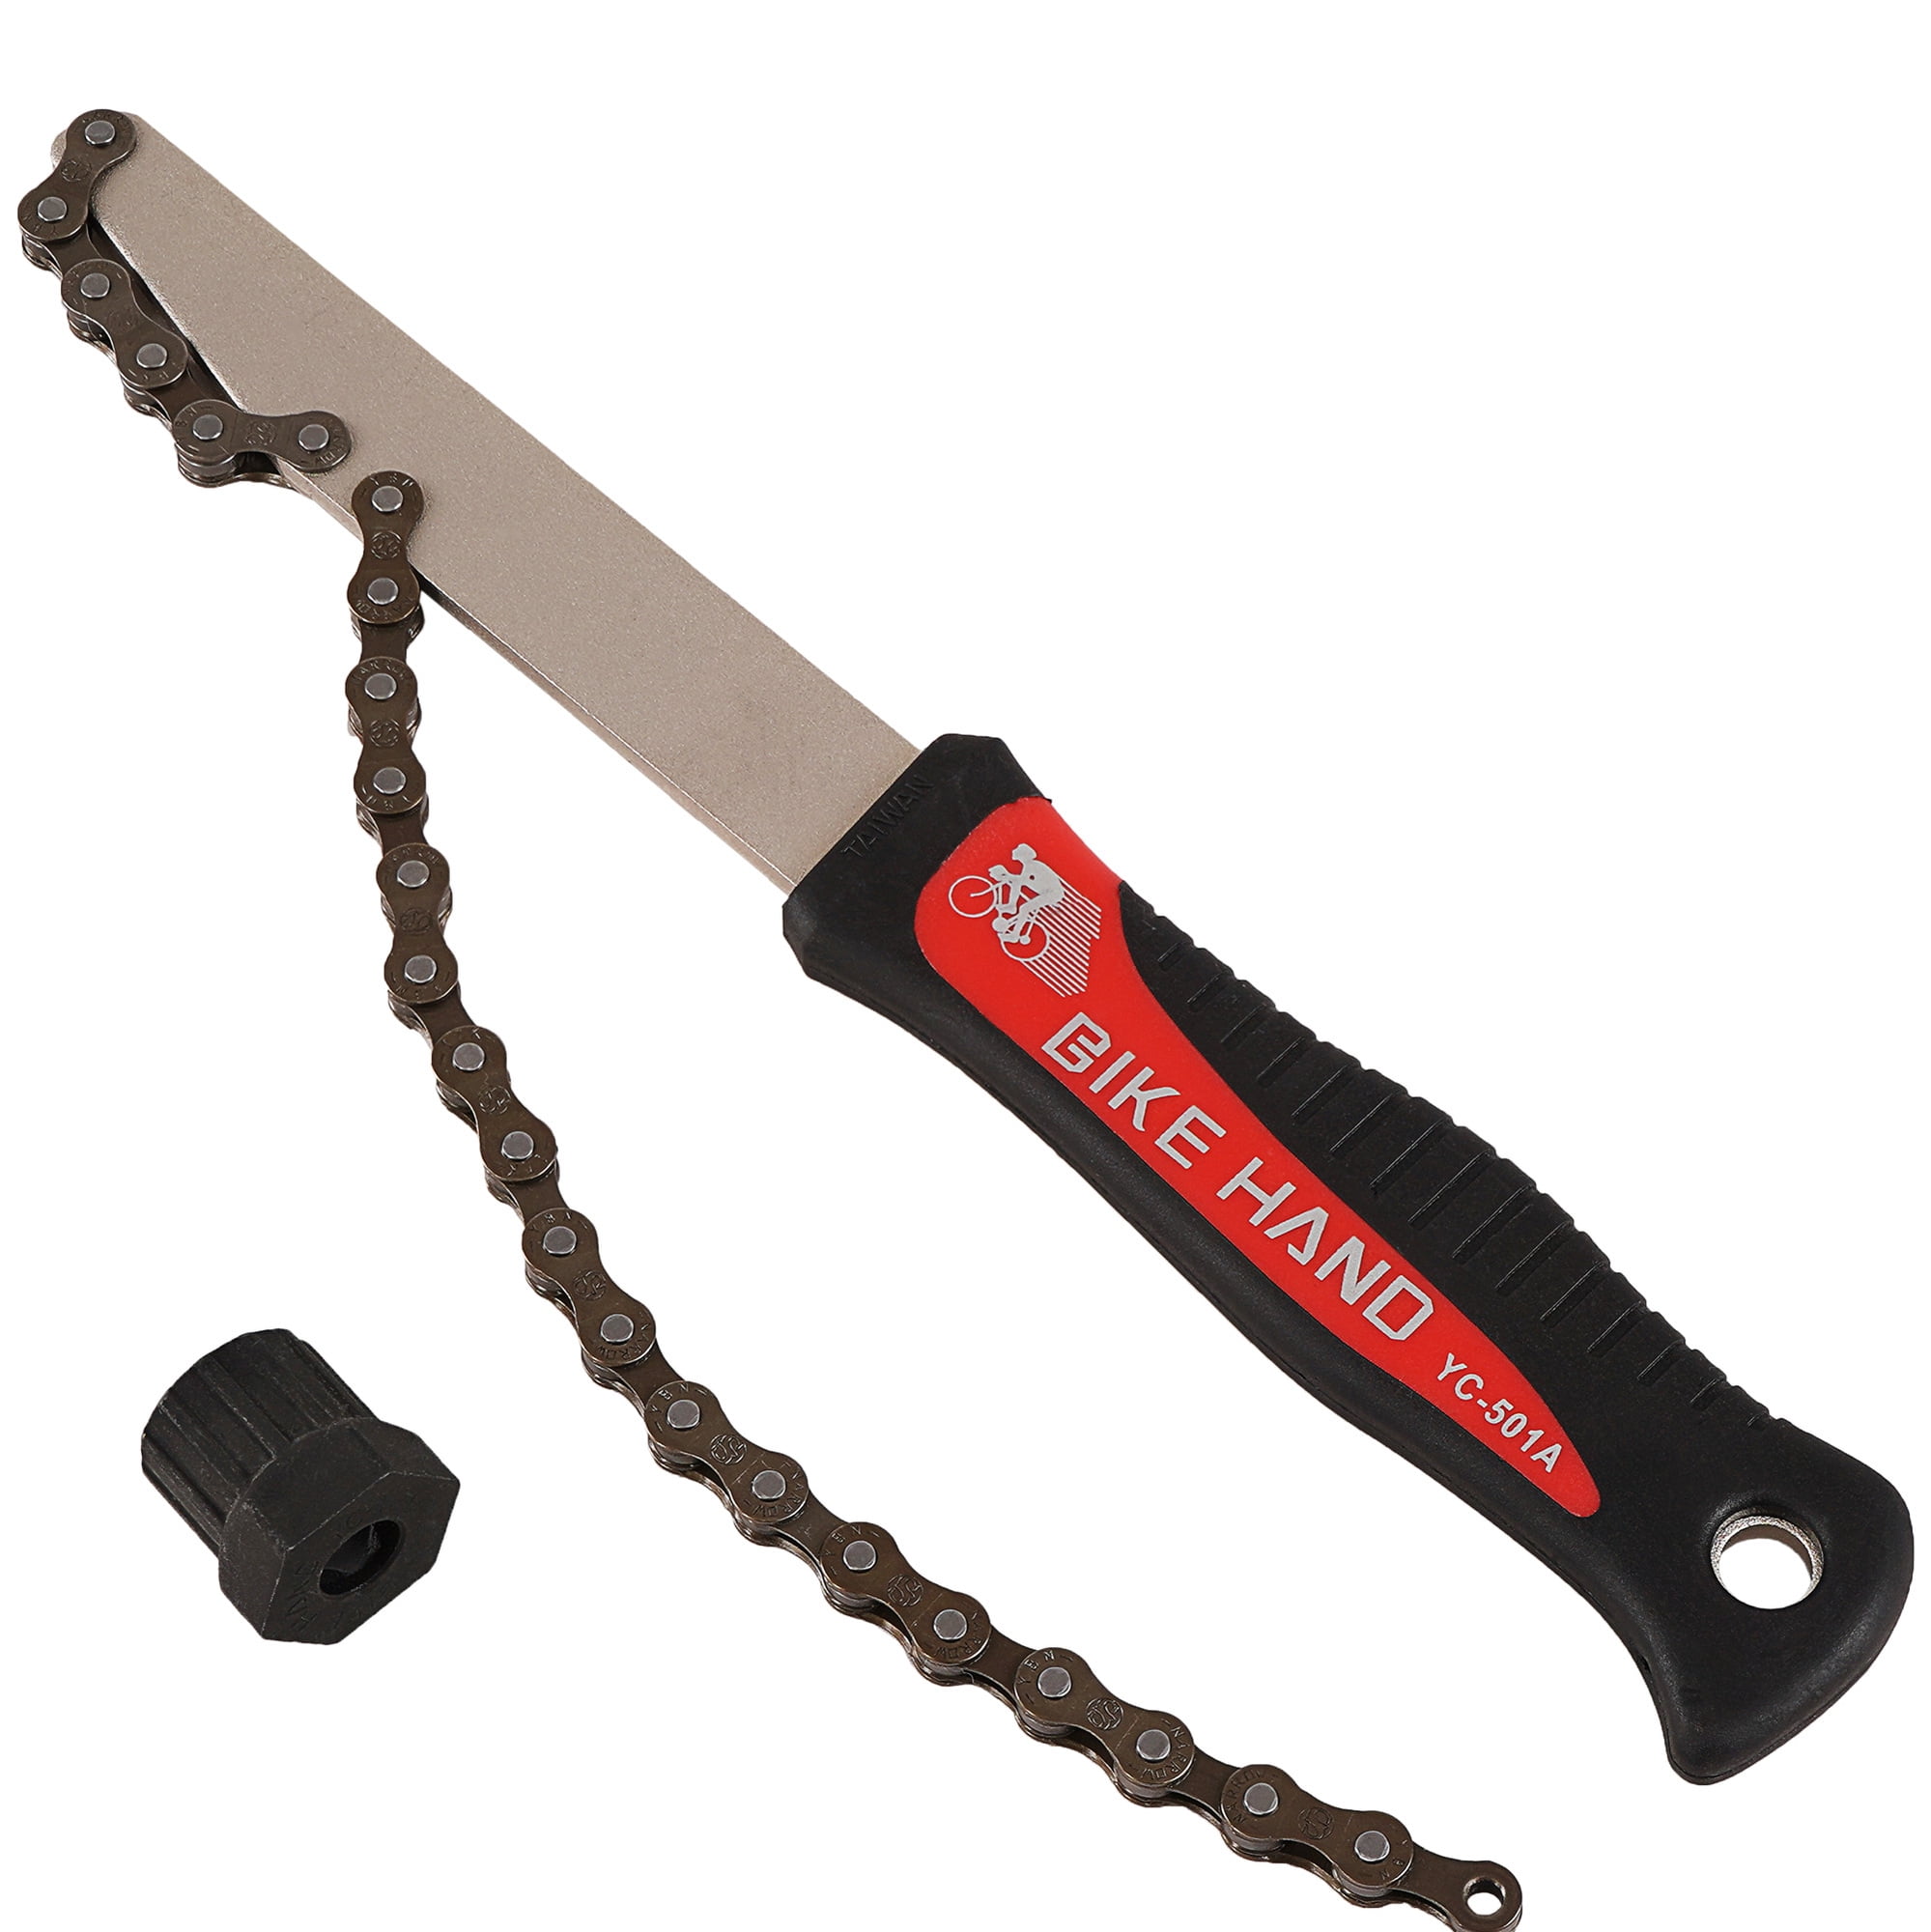 shimano cassette tool and chain whip